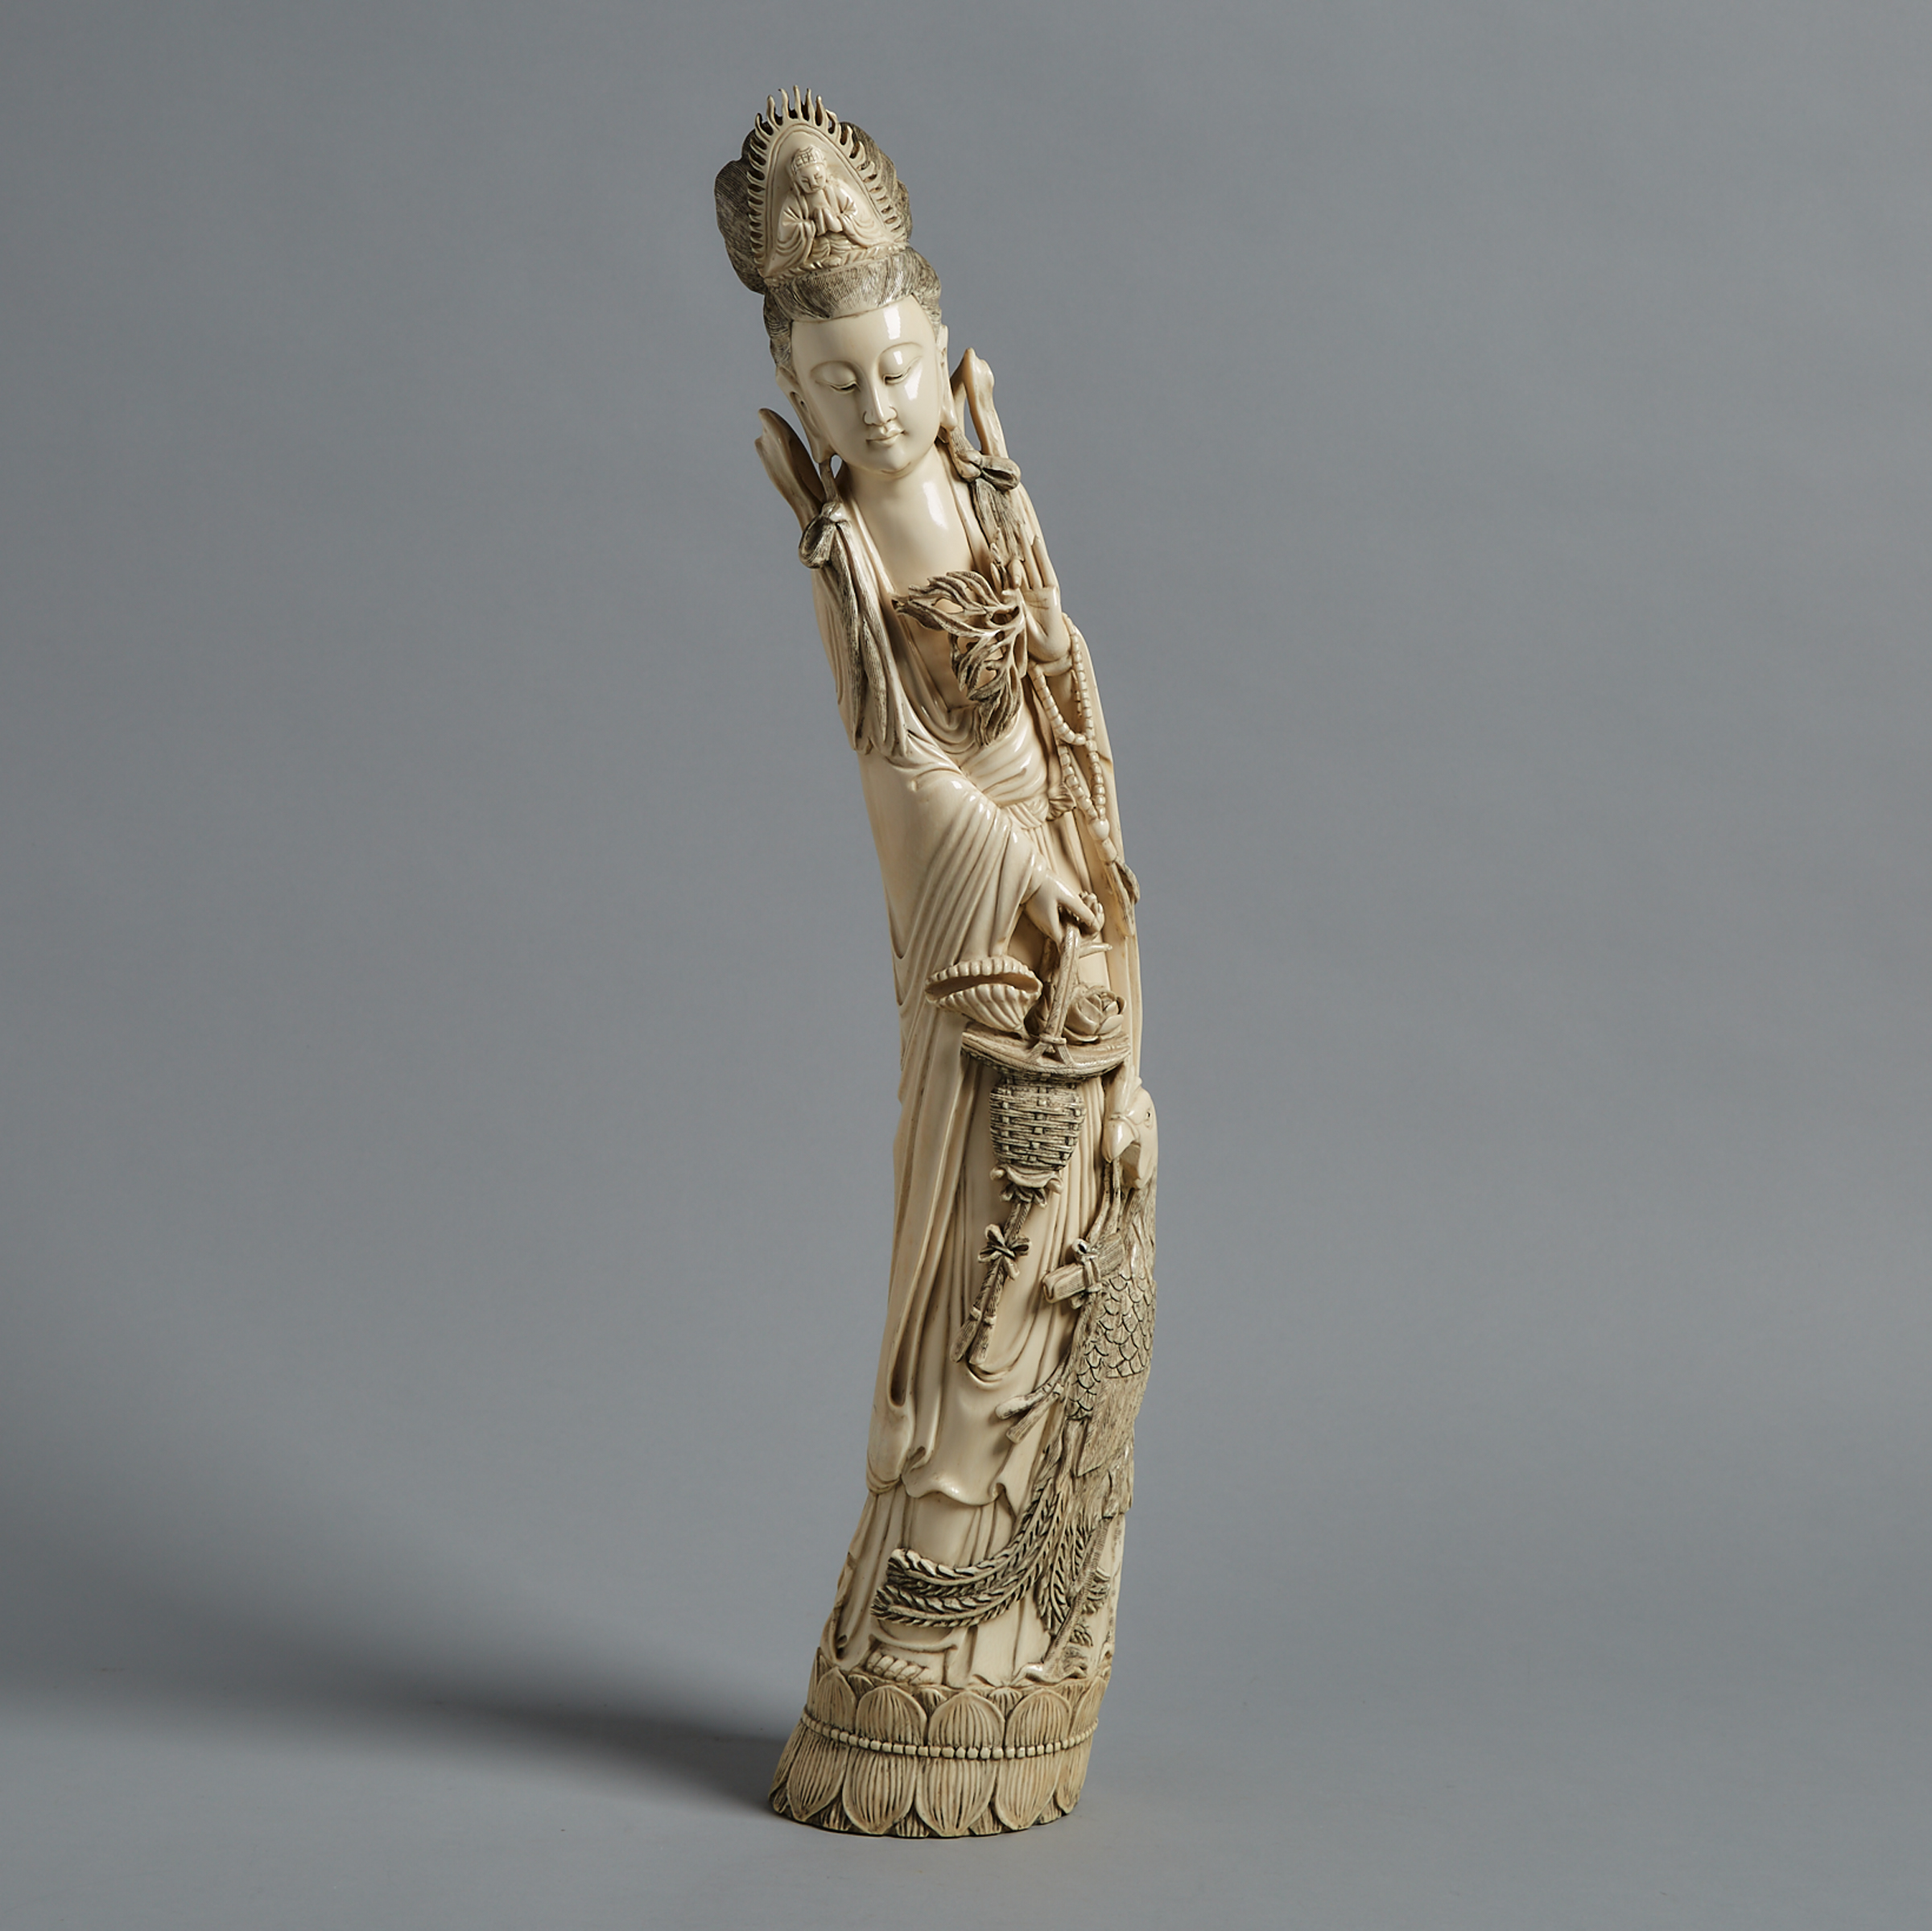 A Large Ivory Carved Guanyin, Circa 1940